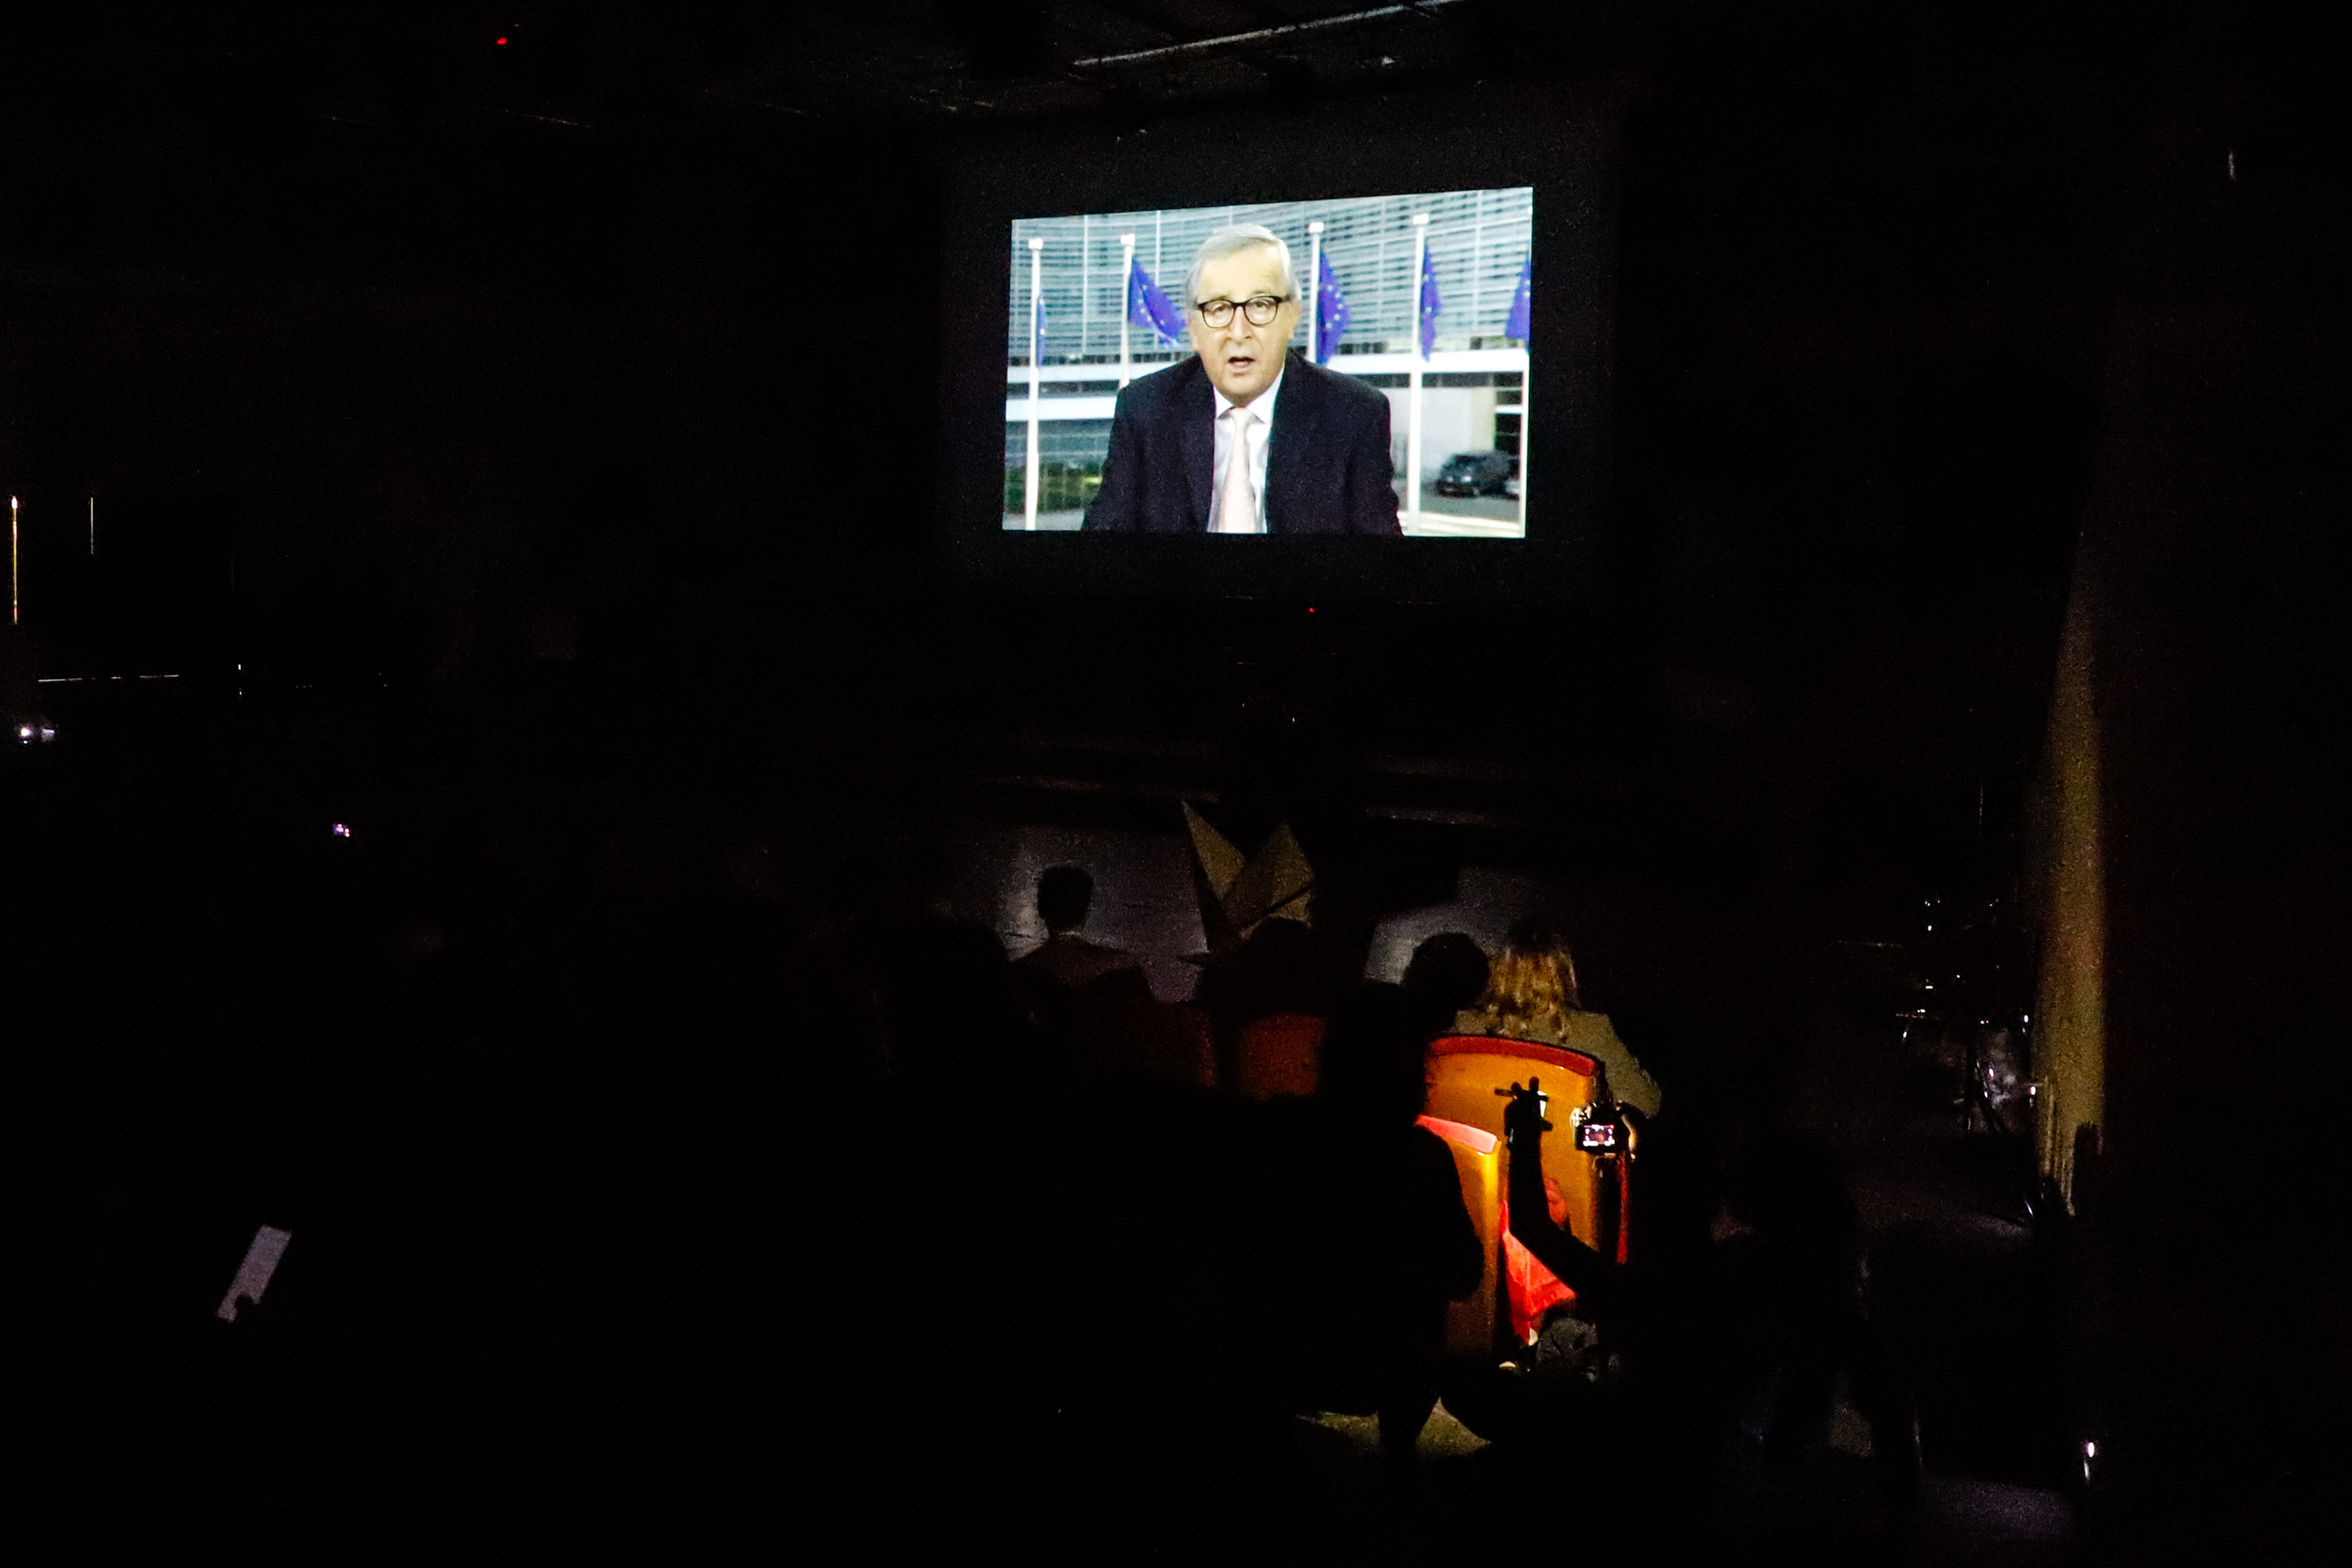 Jean-Claude Juncker, president of the European Commision, in his video message for ESN